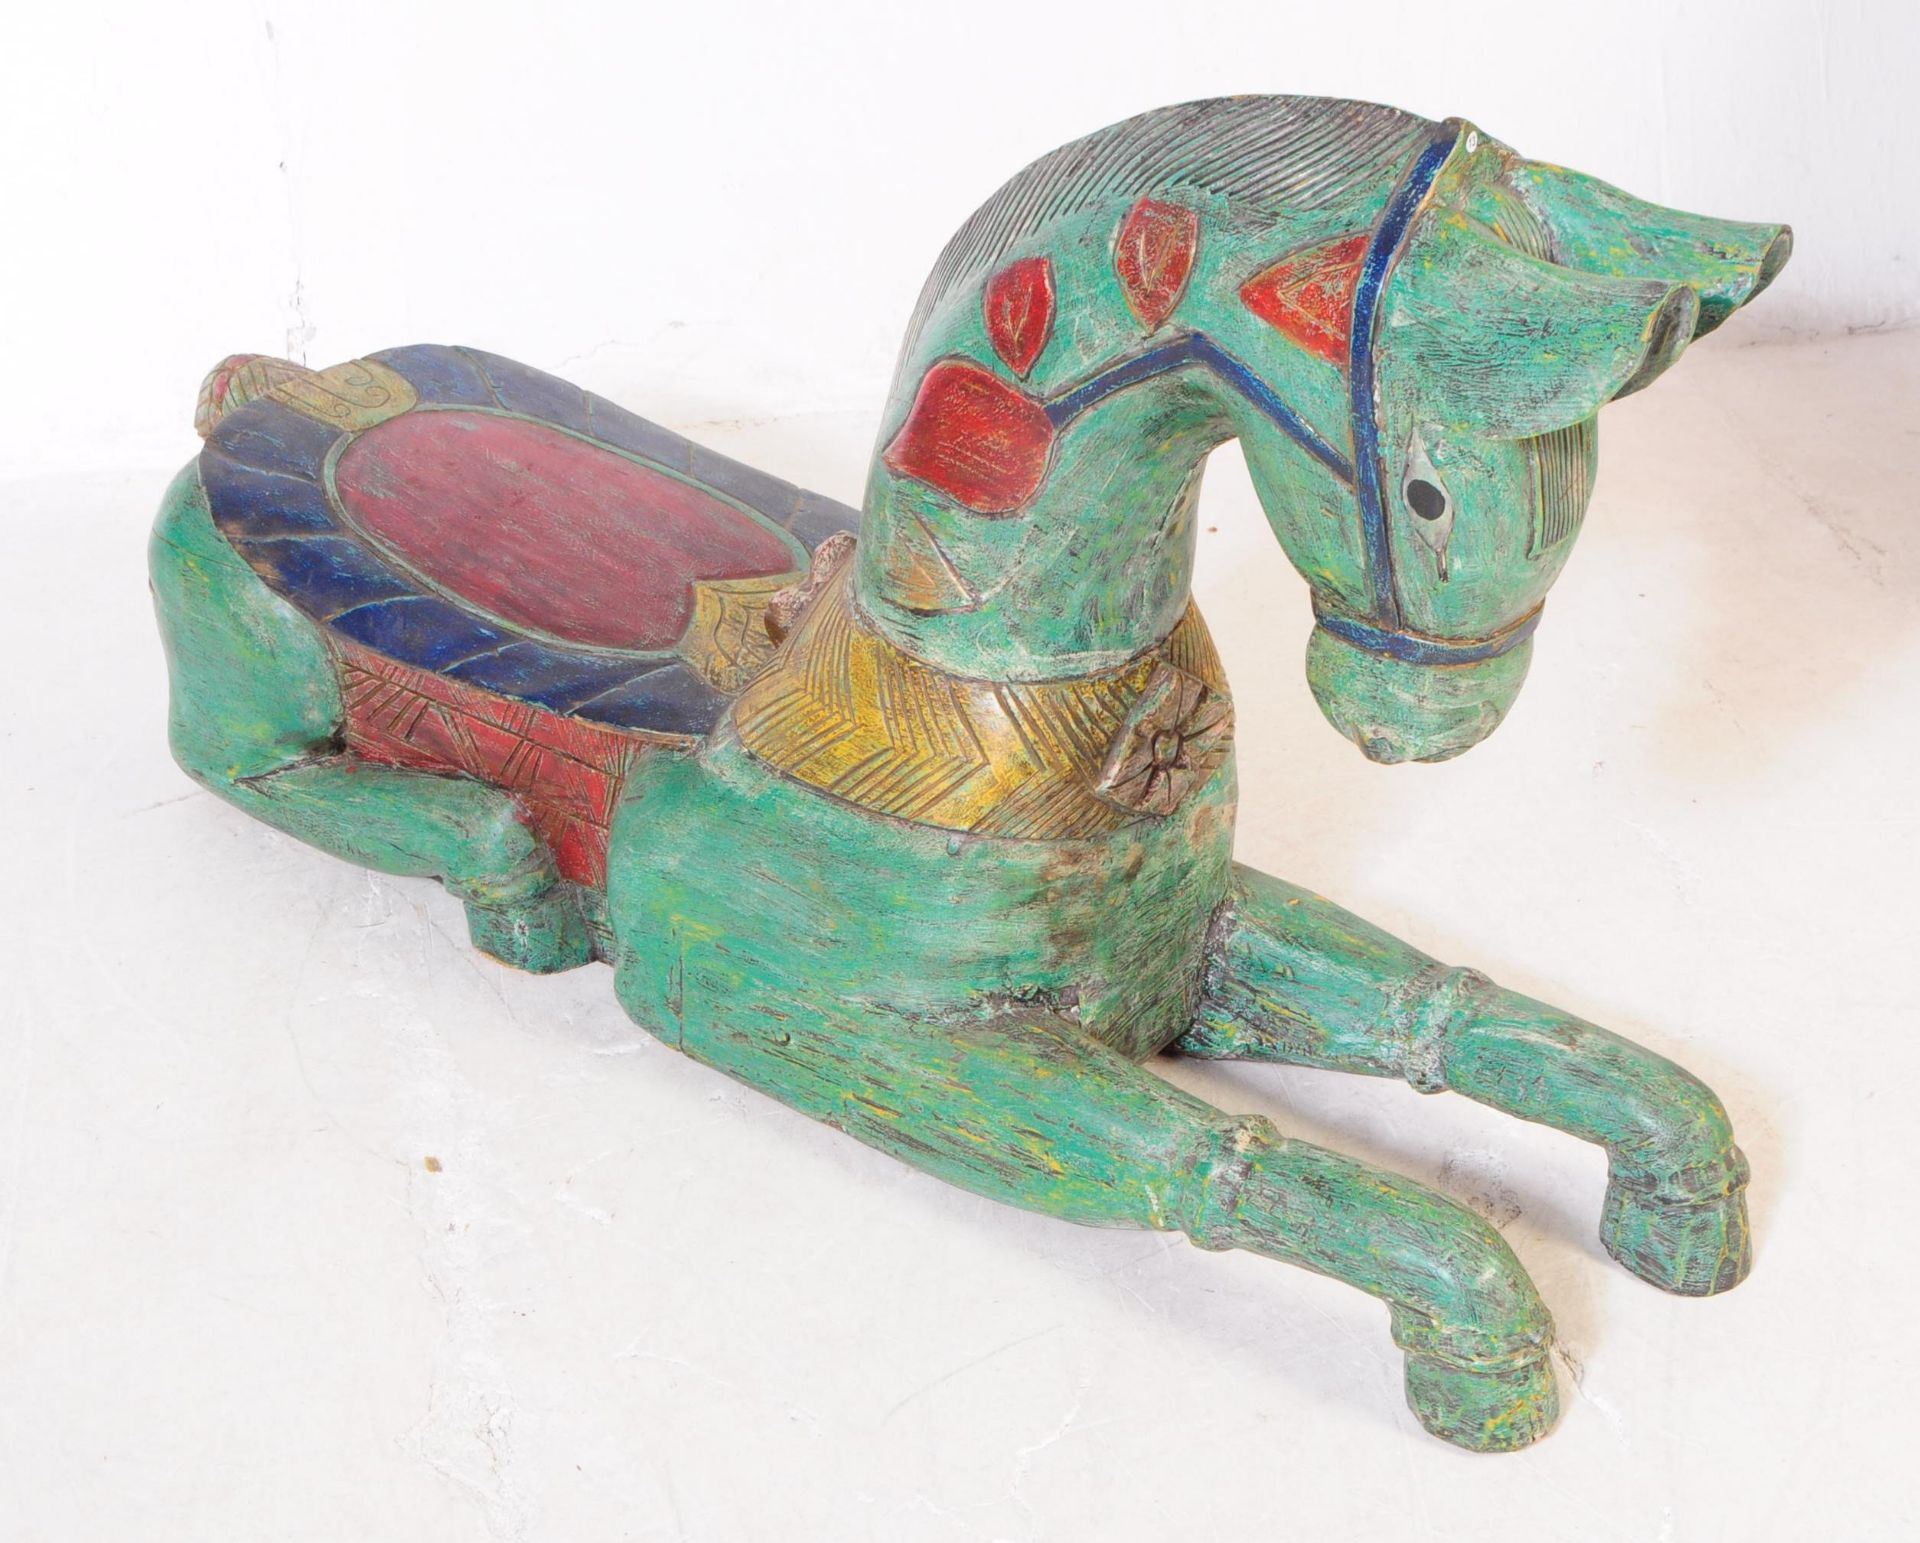 TWO MID 20TH CENTURY FOLK ART SOLID WOOD CARVED HORSES - Image 4 of 6